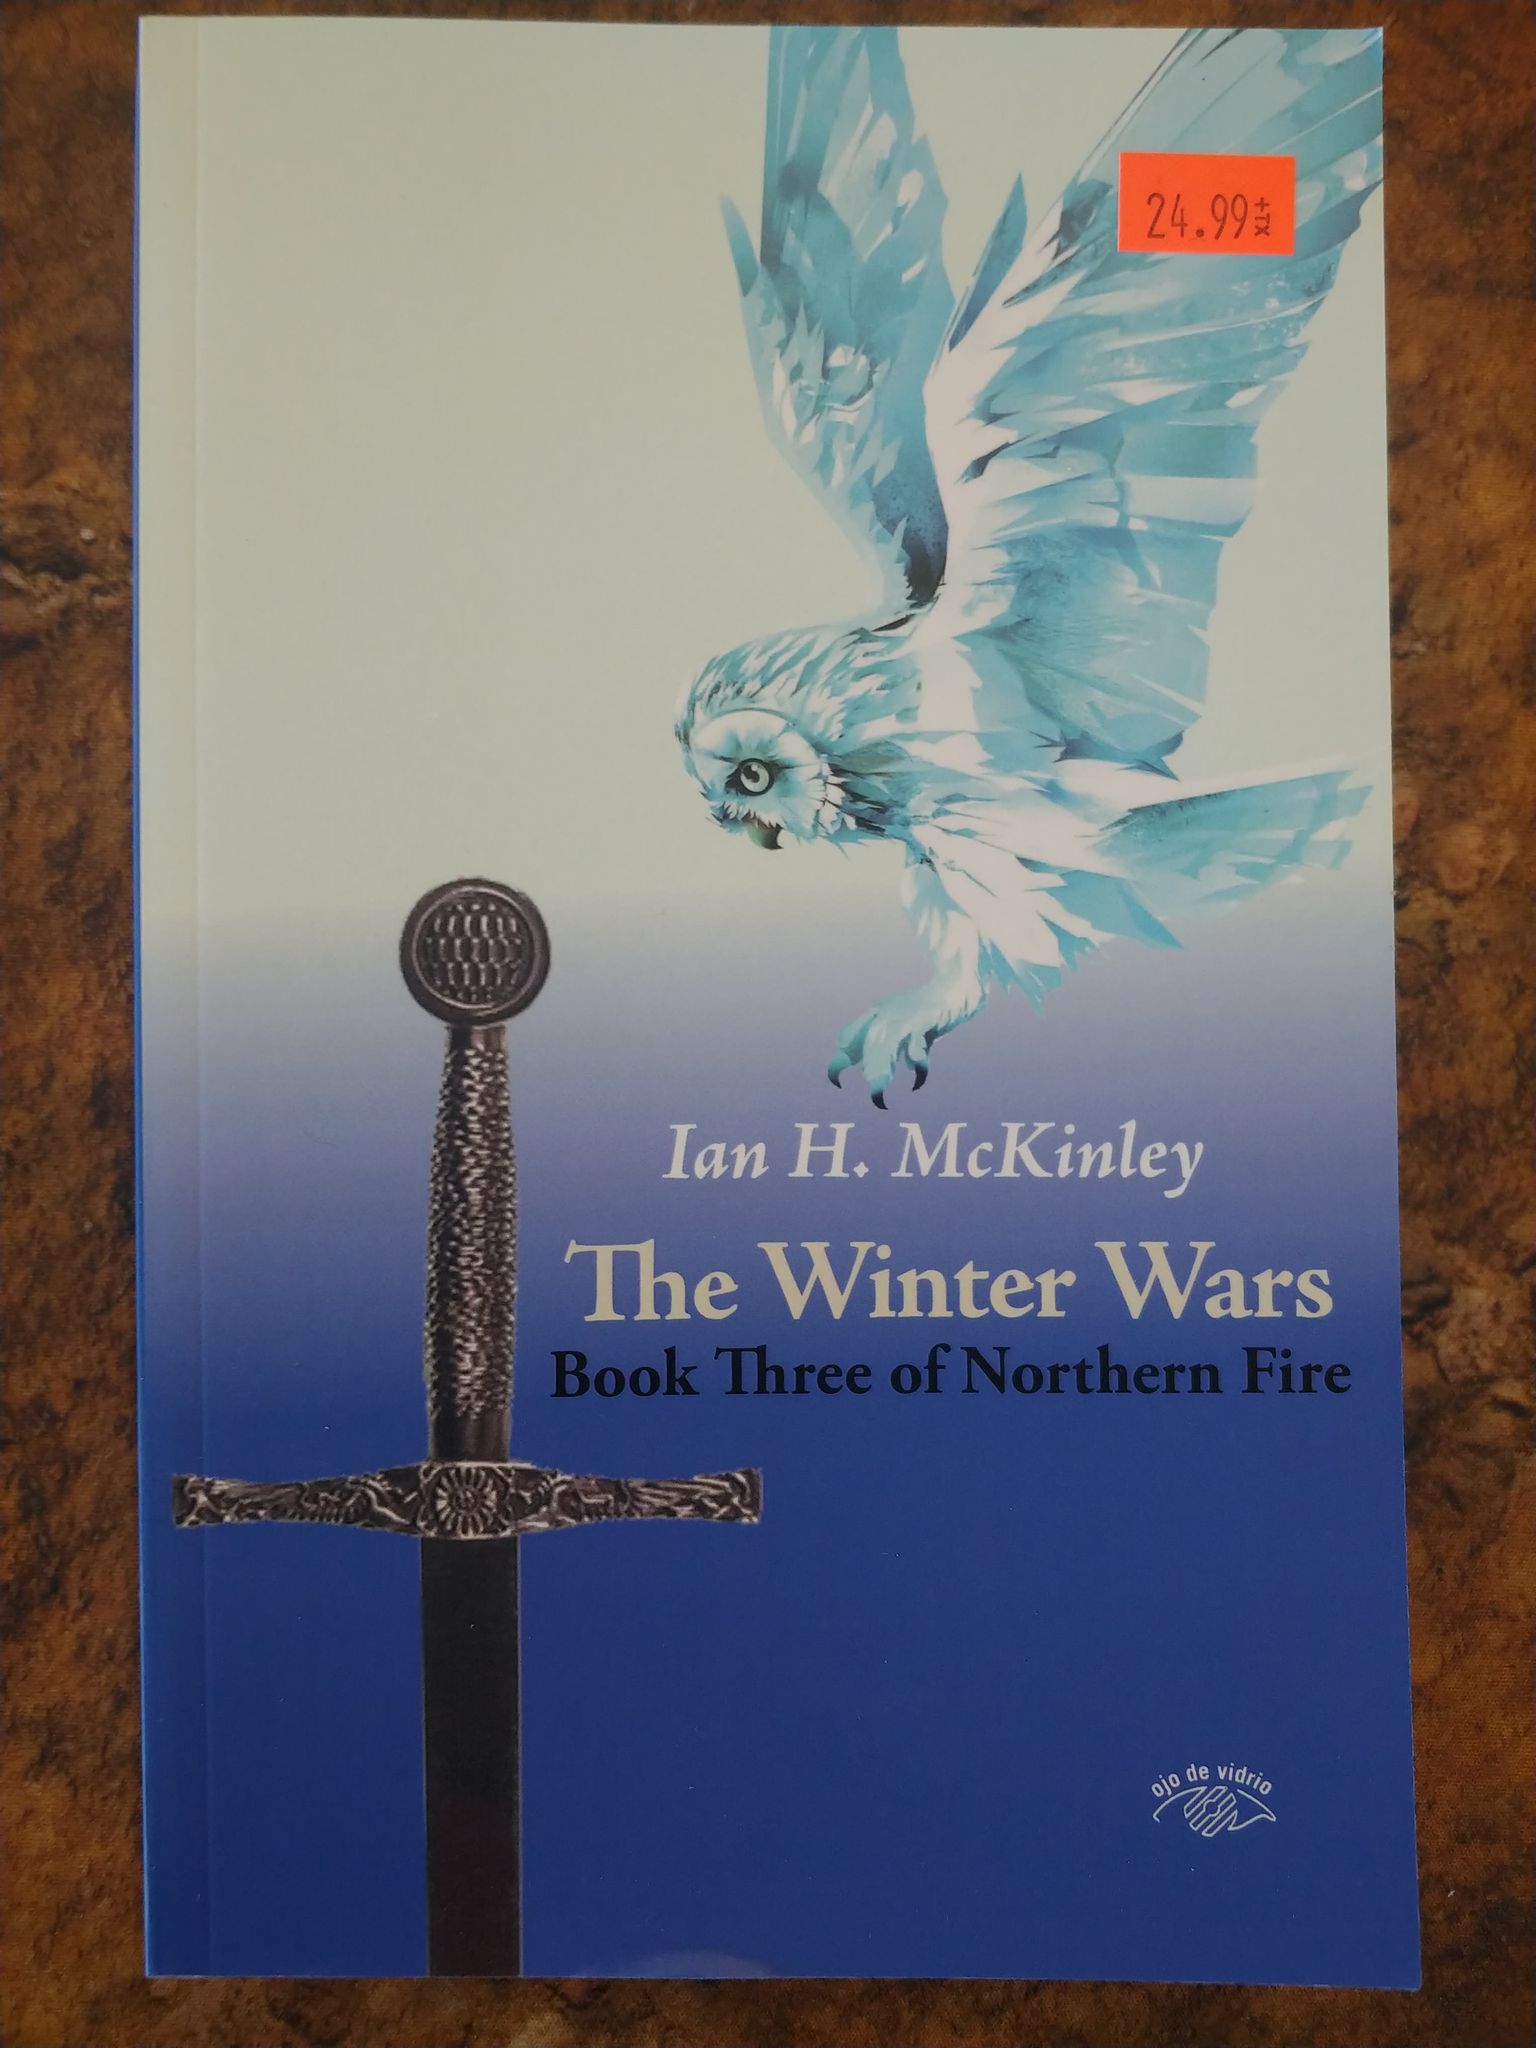 Ian H McKinley - The Winter Wars : Book Three of Northern Fire. | Boutique FDB